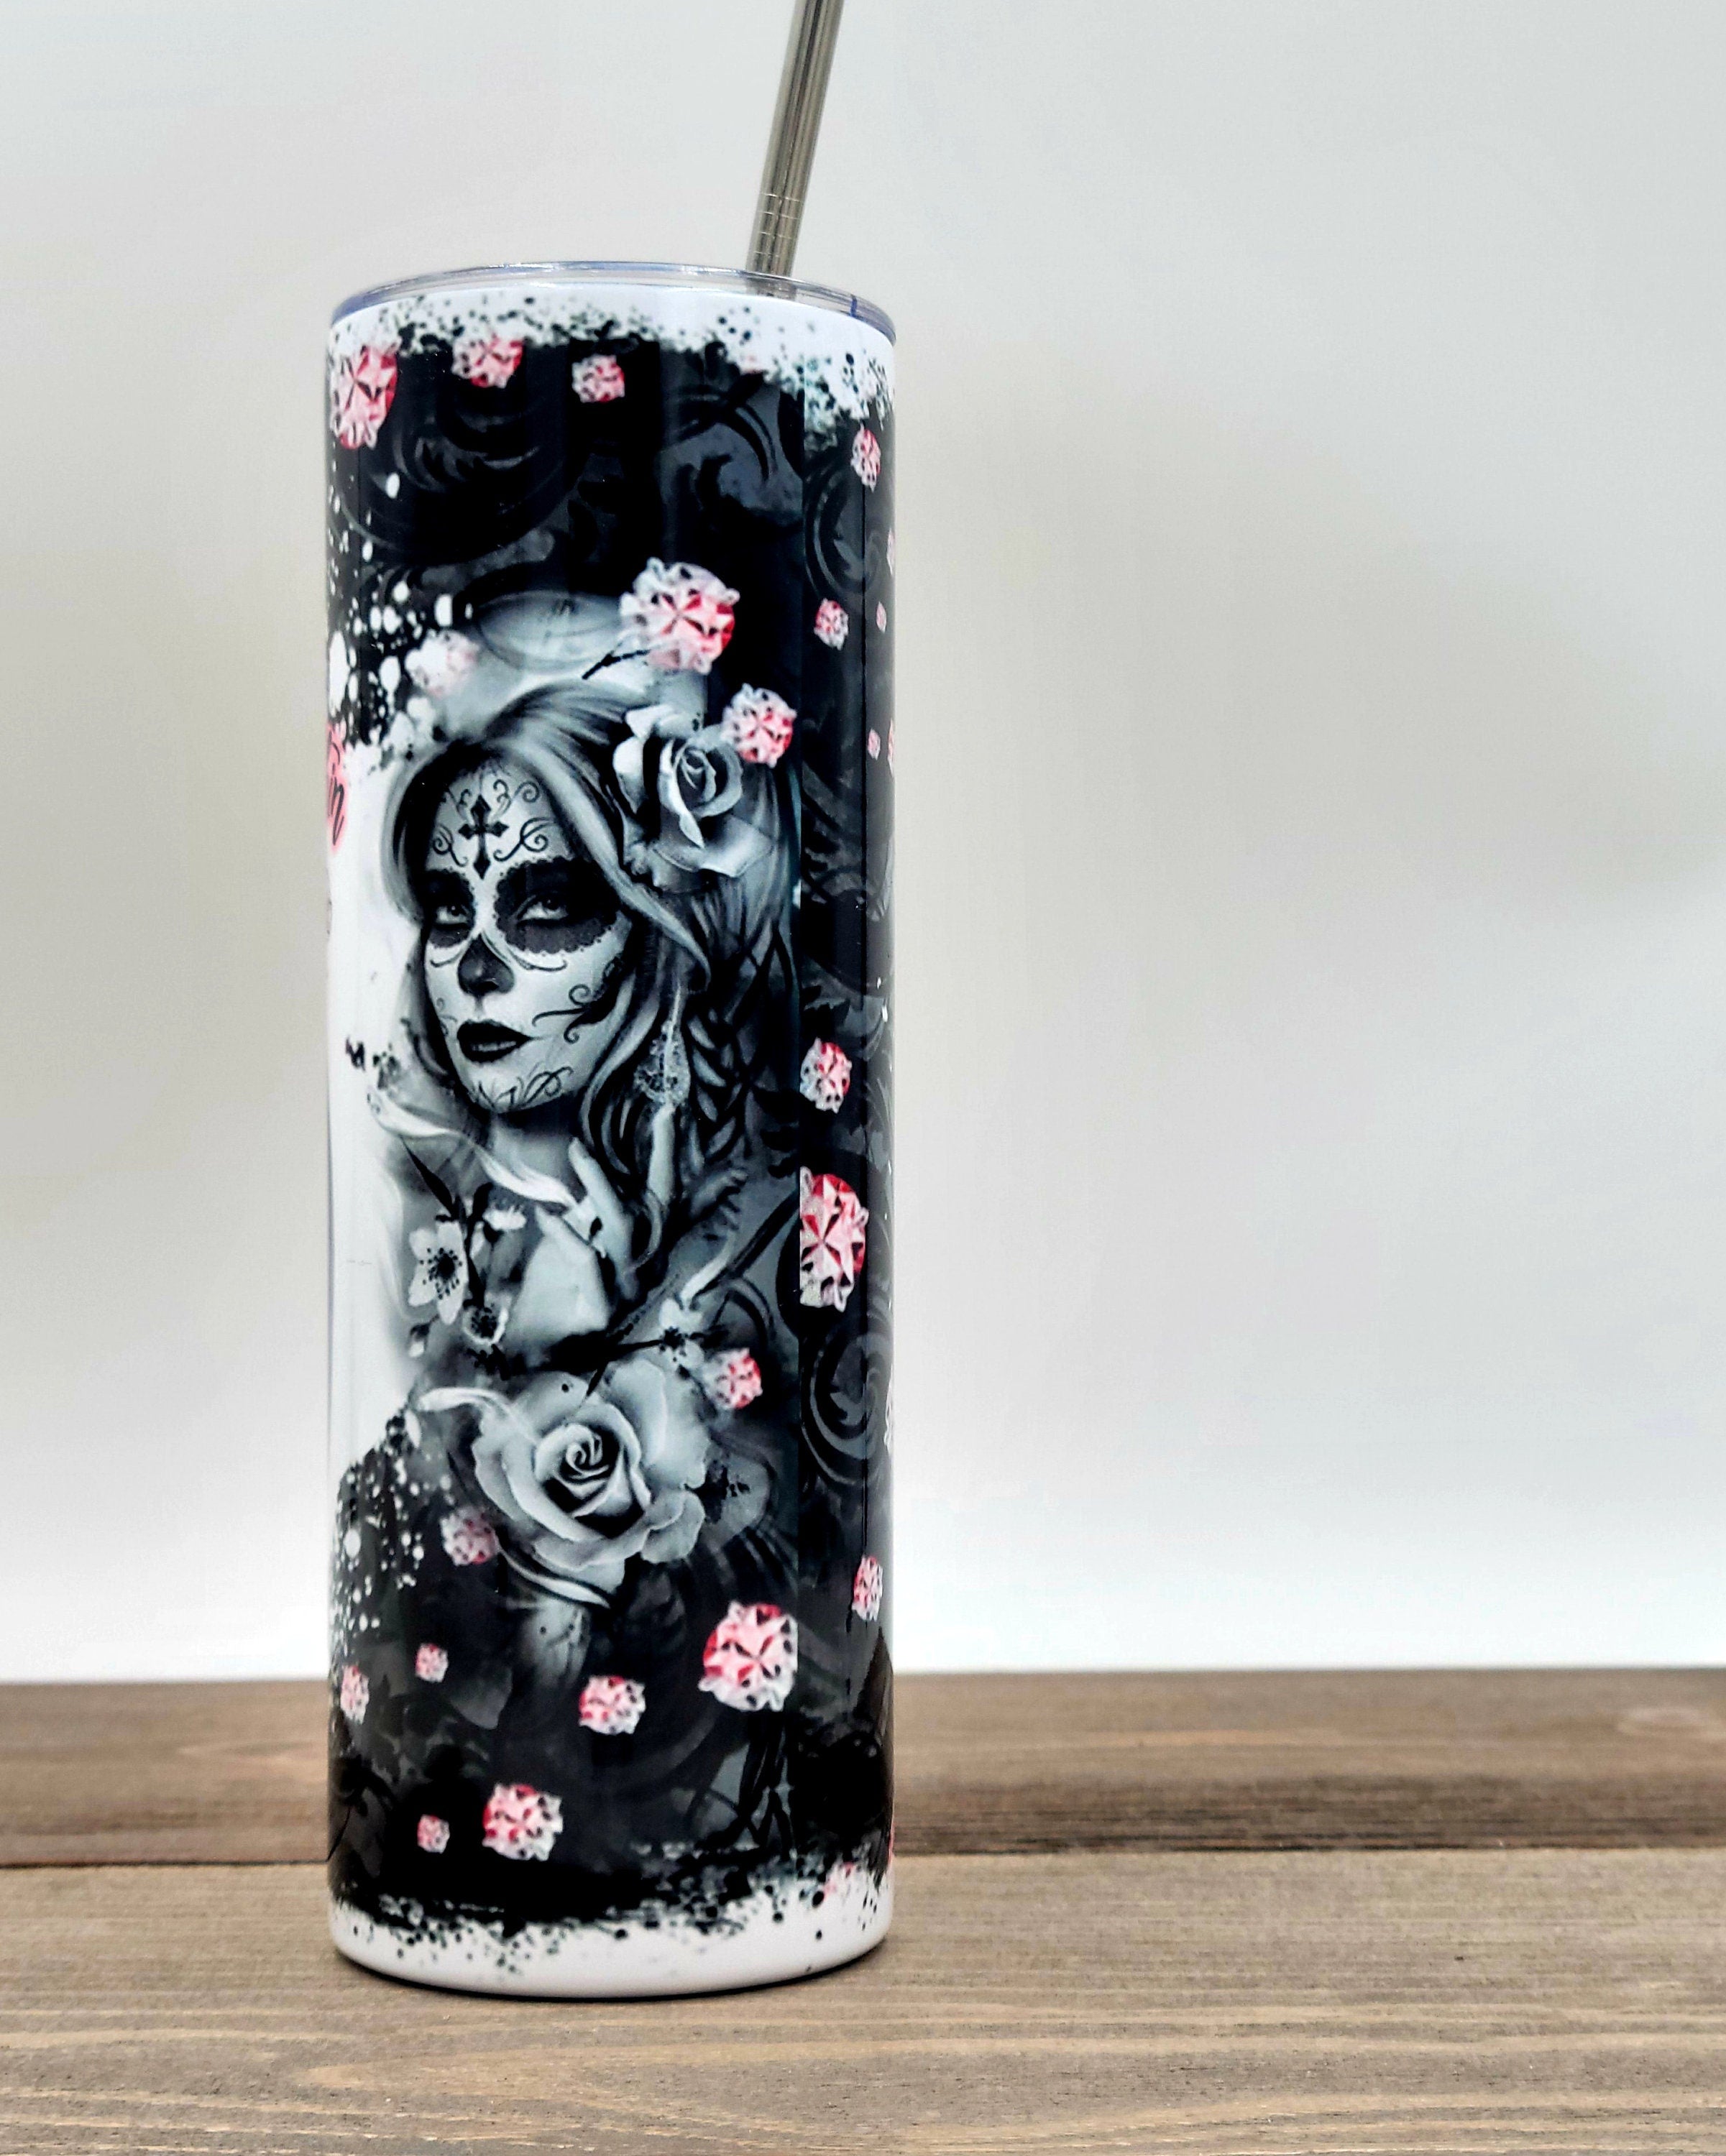 Magic 20oz Skull Tumbler with Lid and Straw